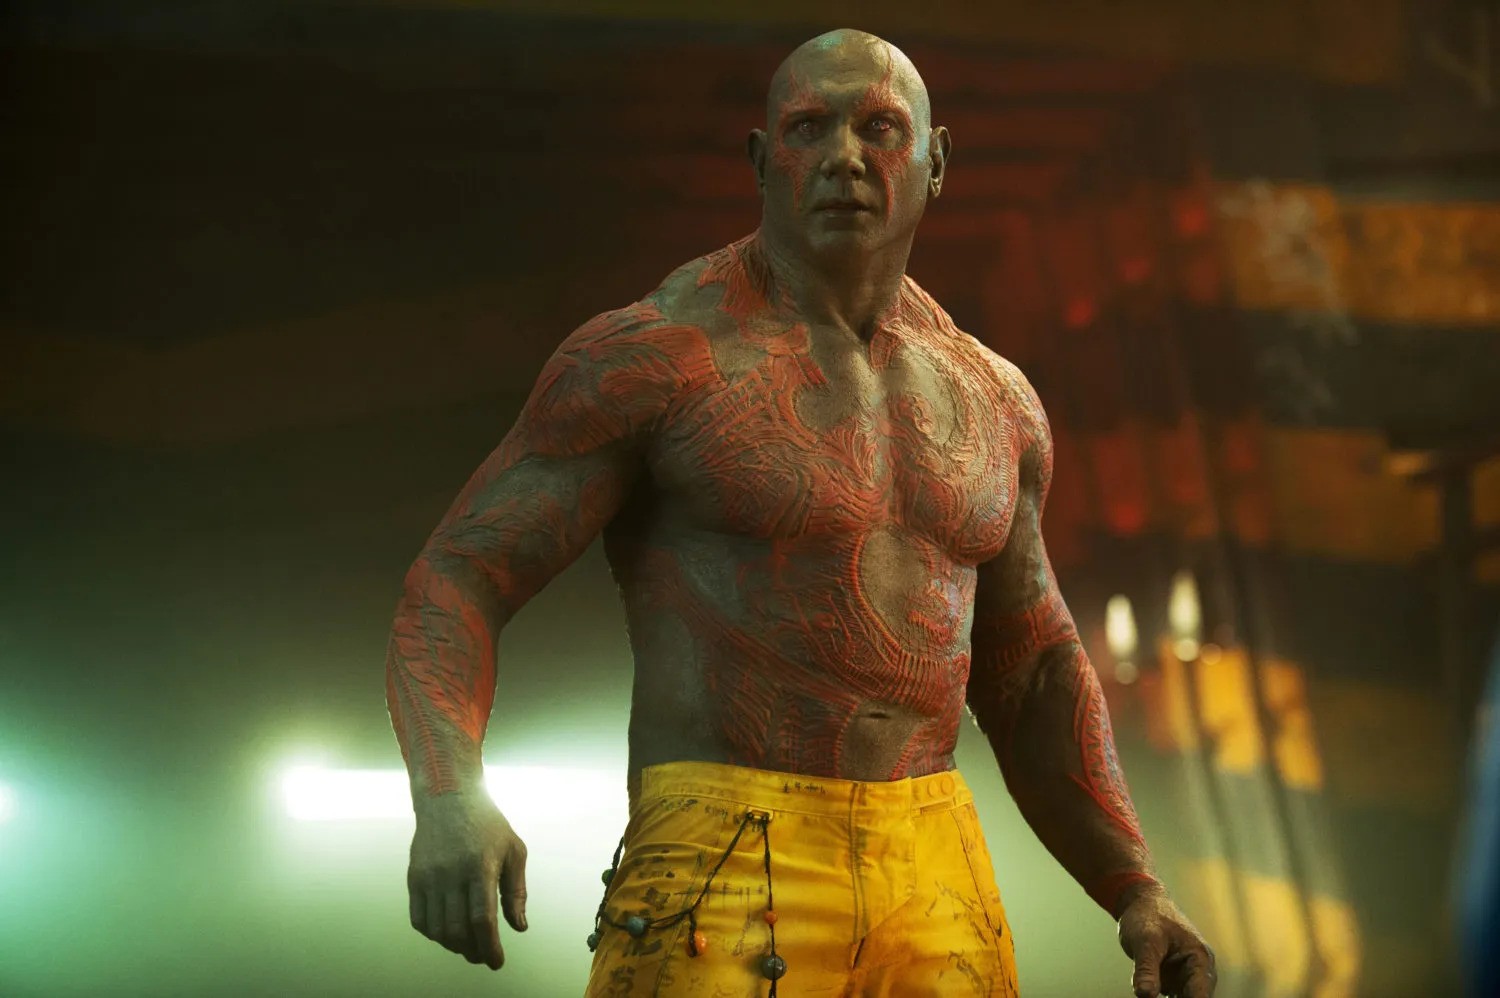 Dave Bautista as Drax the Destroyer in MCU